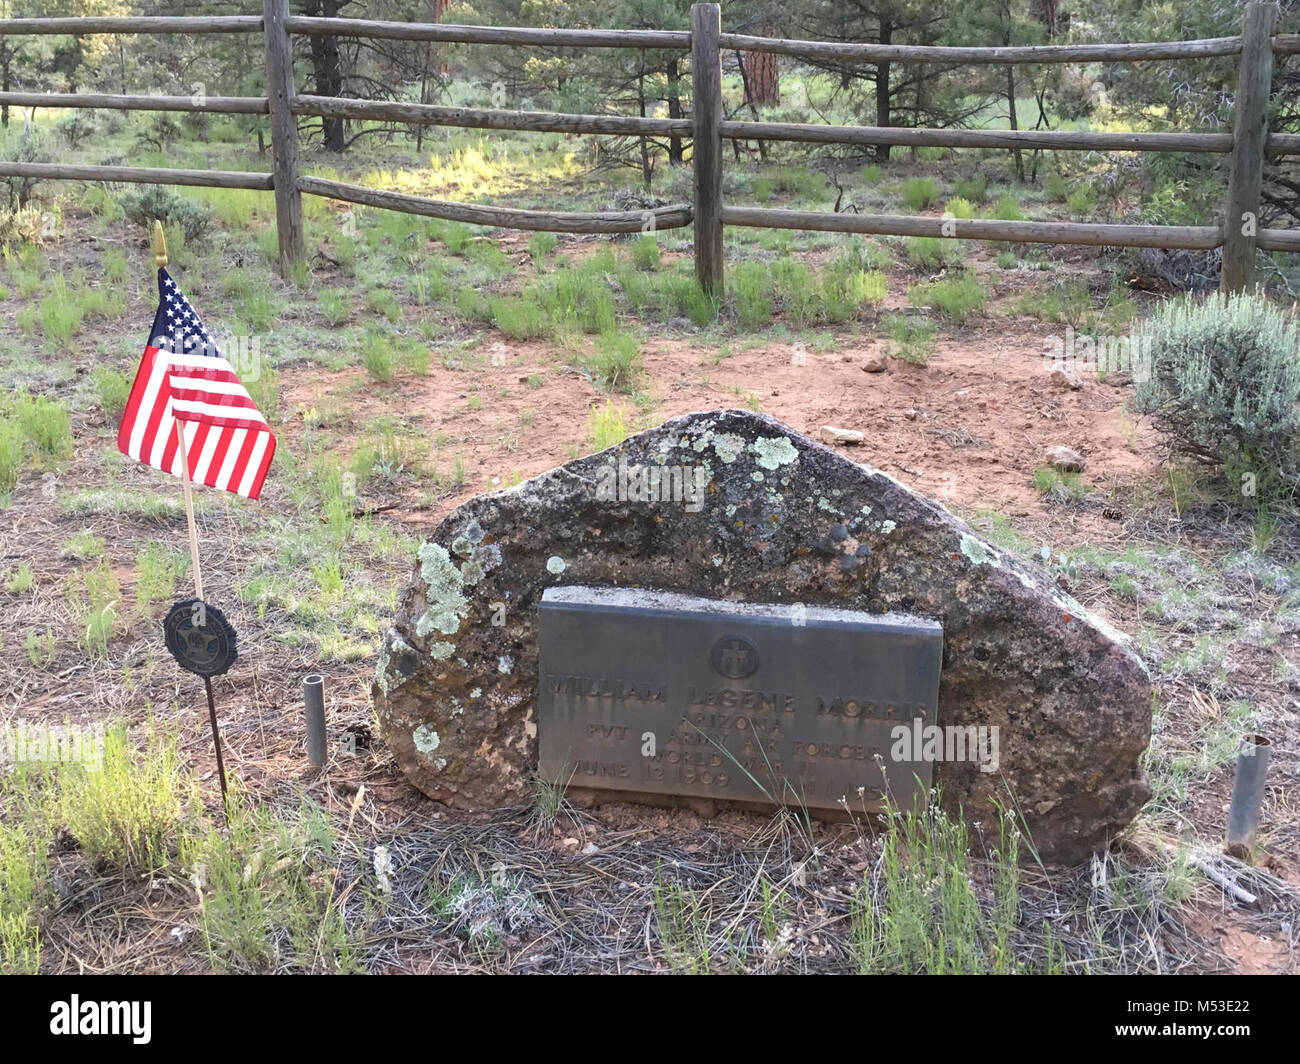 Grand Canyon National Park Pioneer Cemetery - Memorial Day . First used before the establishment of the national park but not formally dedicated until 1928, the cemetery serves as a resting place for many early Grand Canyon families and pioneers. The cemetery—part of the Grand Canyon Village National Historic District—has more than 390 individual graves, several of which date back to before the establishment of the park and the dedication of the cemete Stock Photo